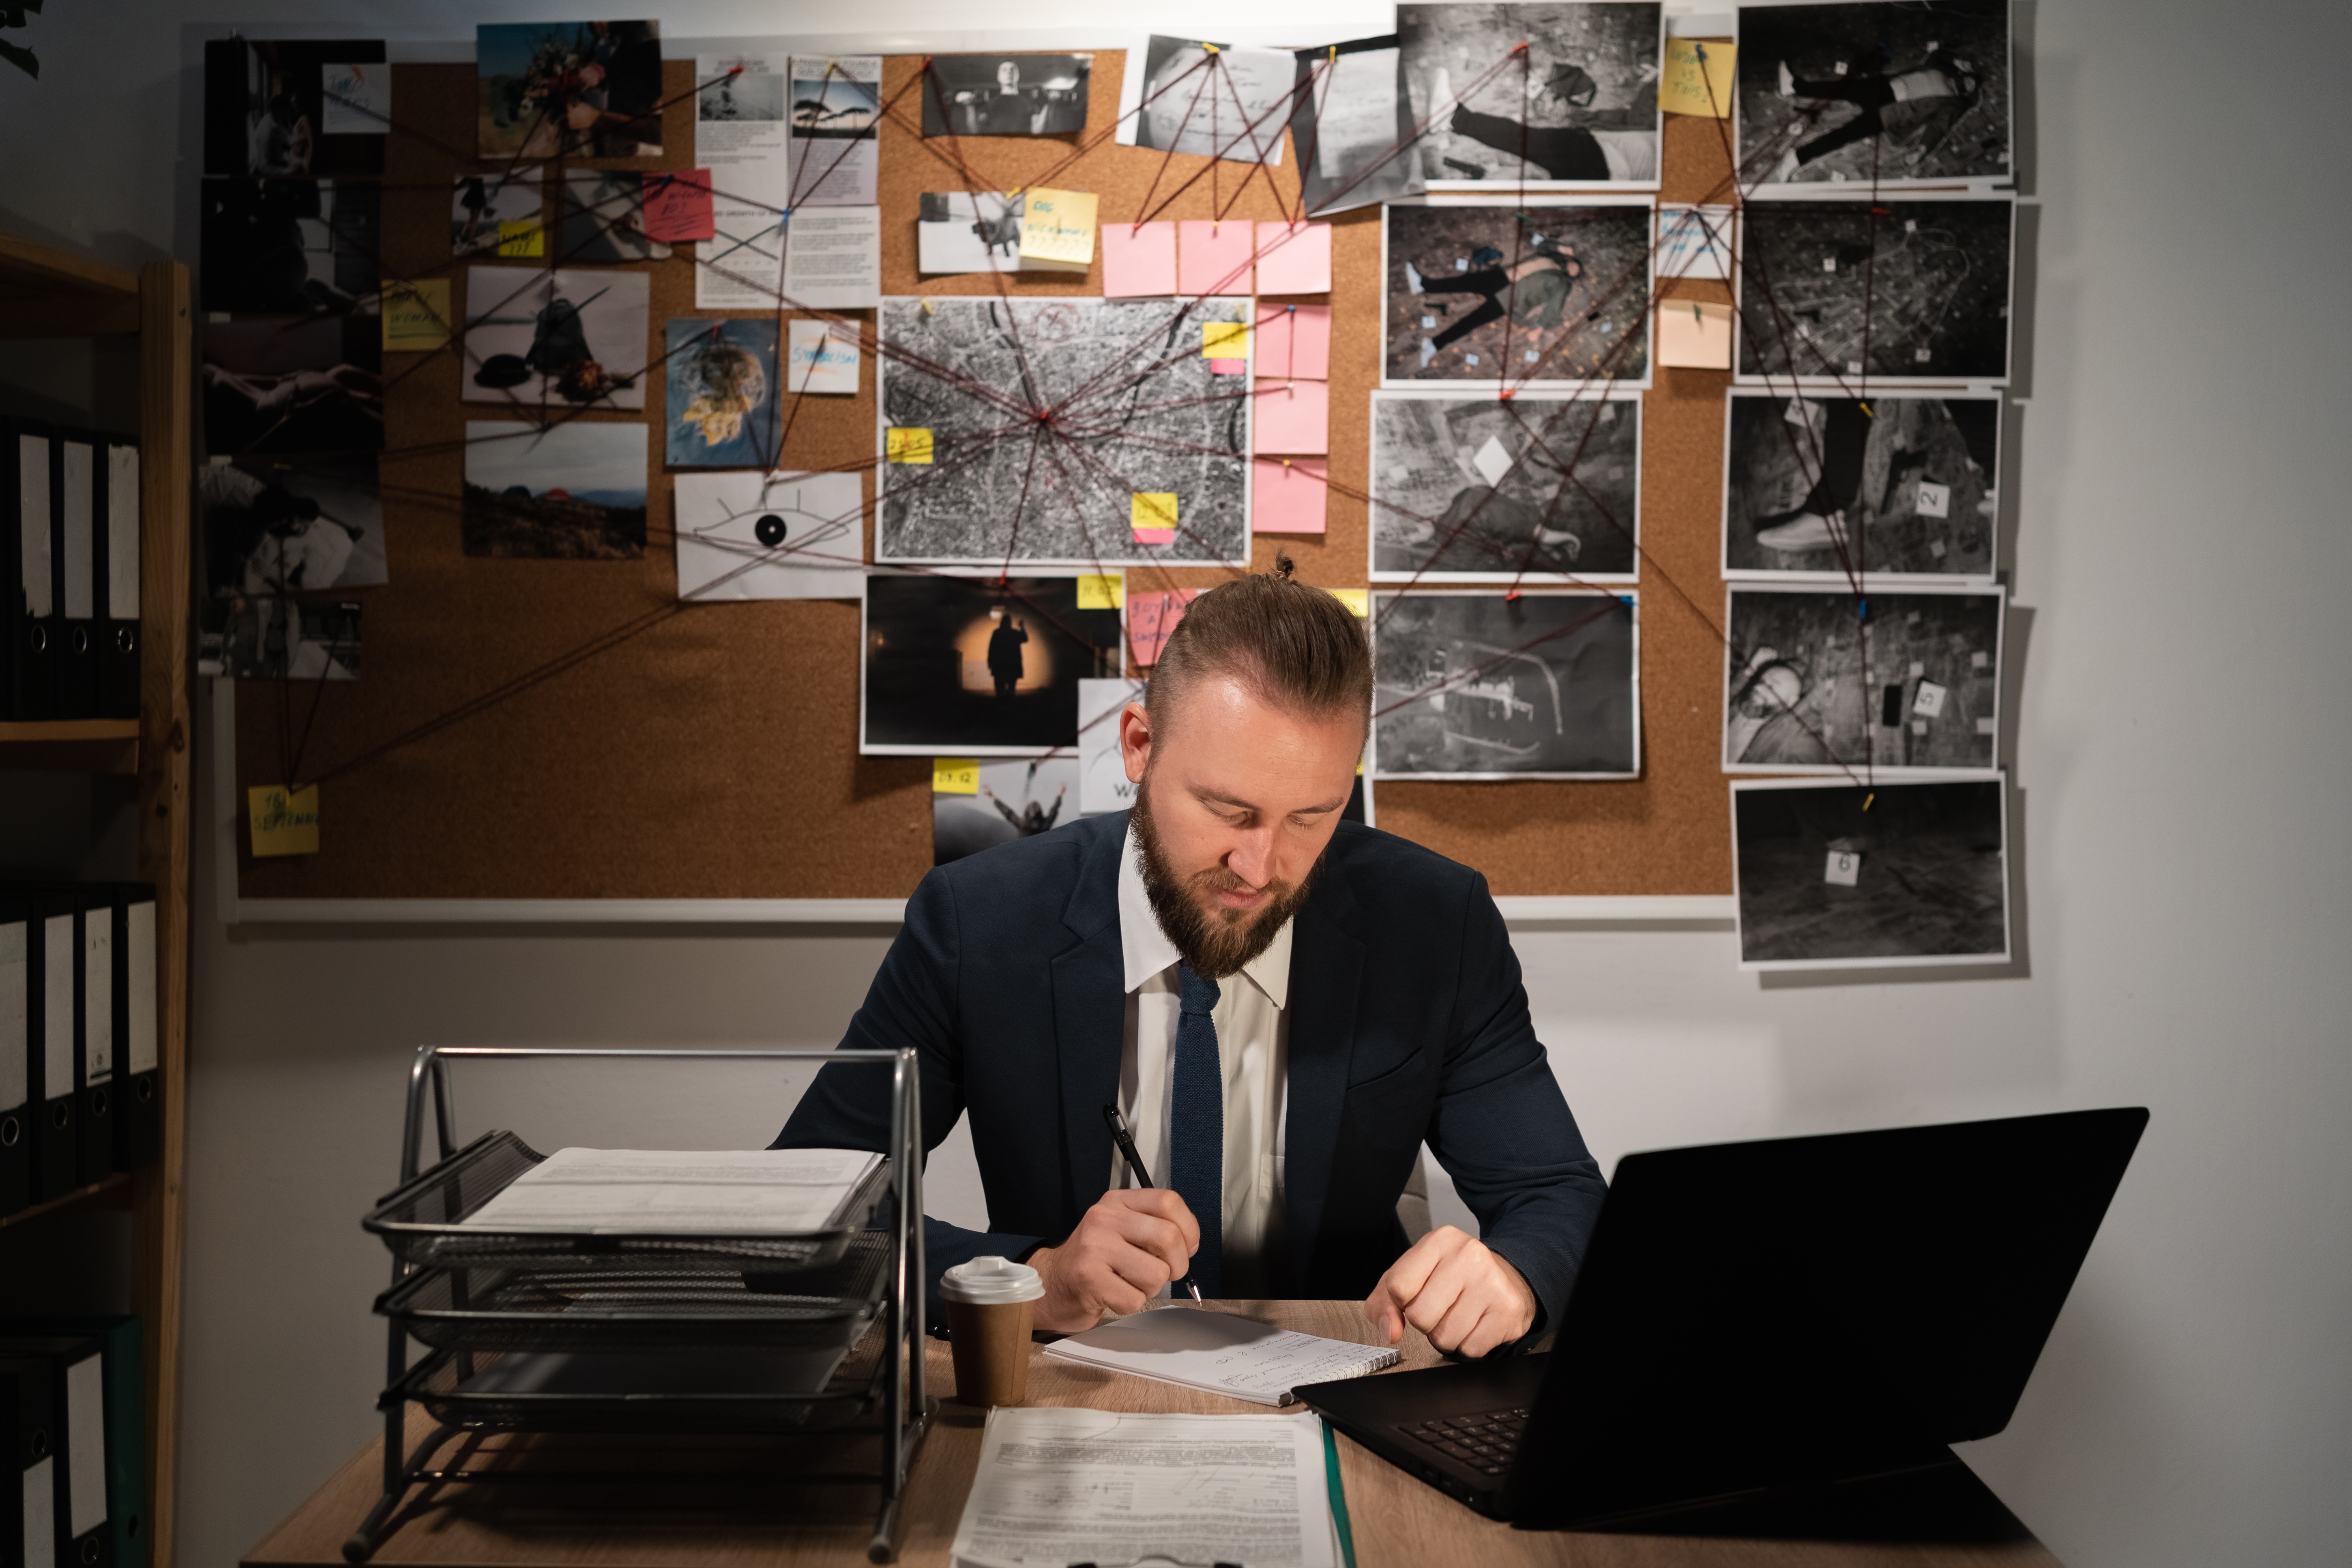 detective man working with evidence at desk in office, evidence board in the background, copy space  | Source: Shutterstock